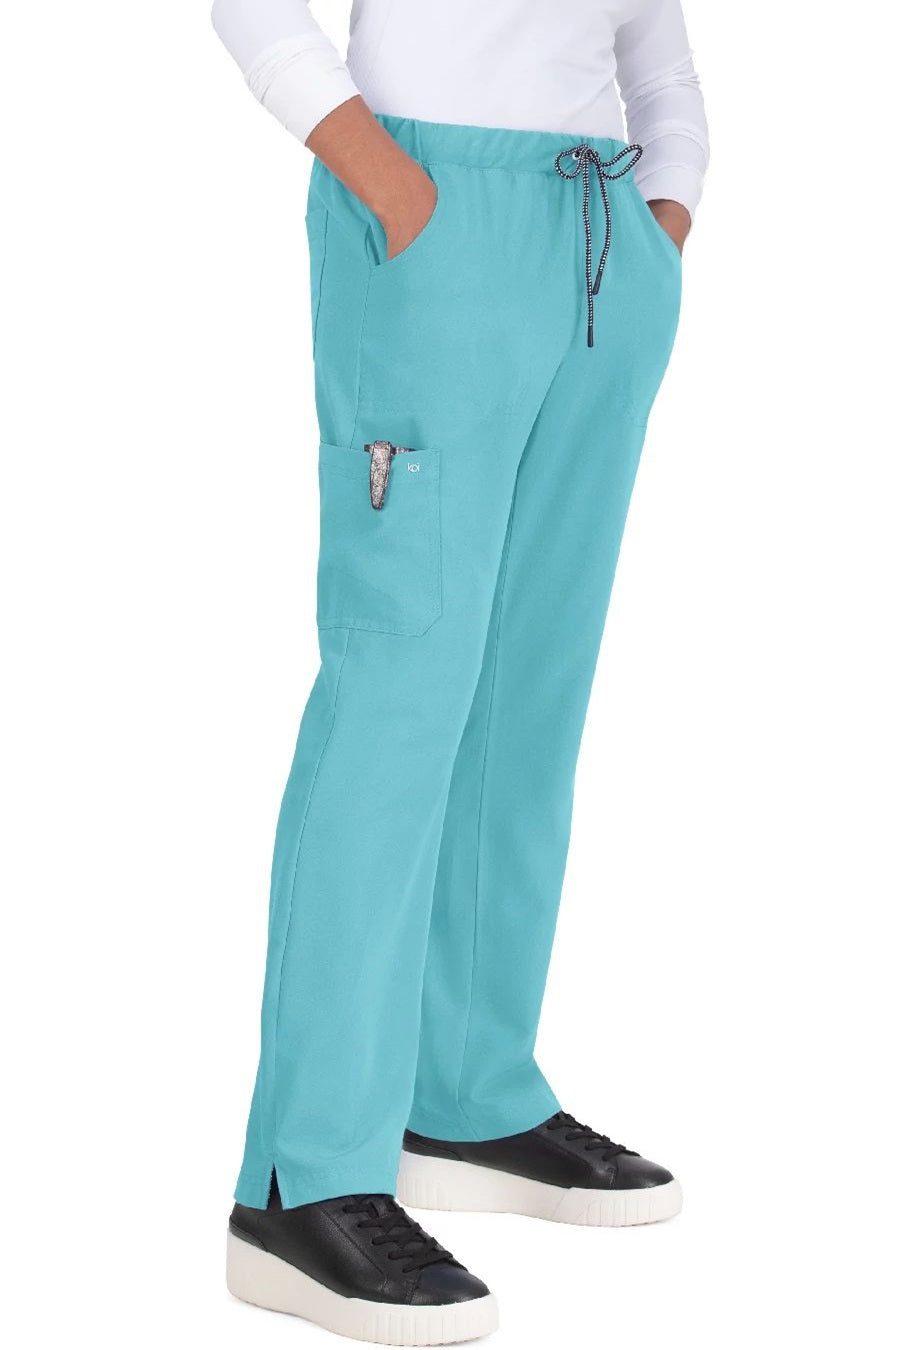 Koi Scrub Pant Next Gen Everyday Hero in Sea Glass at Parker's Clothing & Shoes.